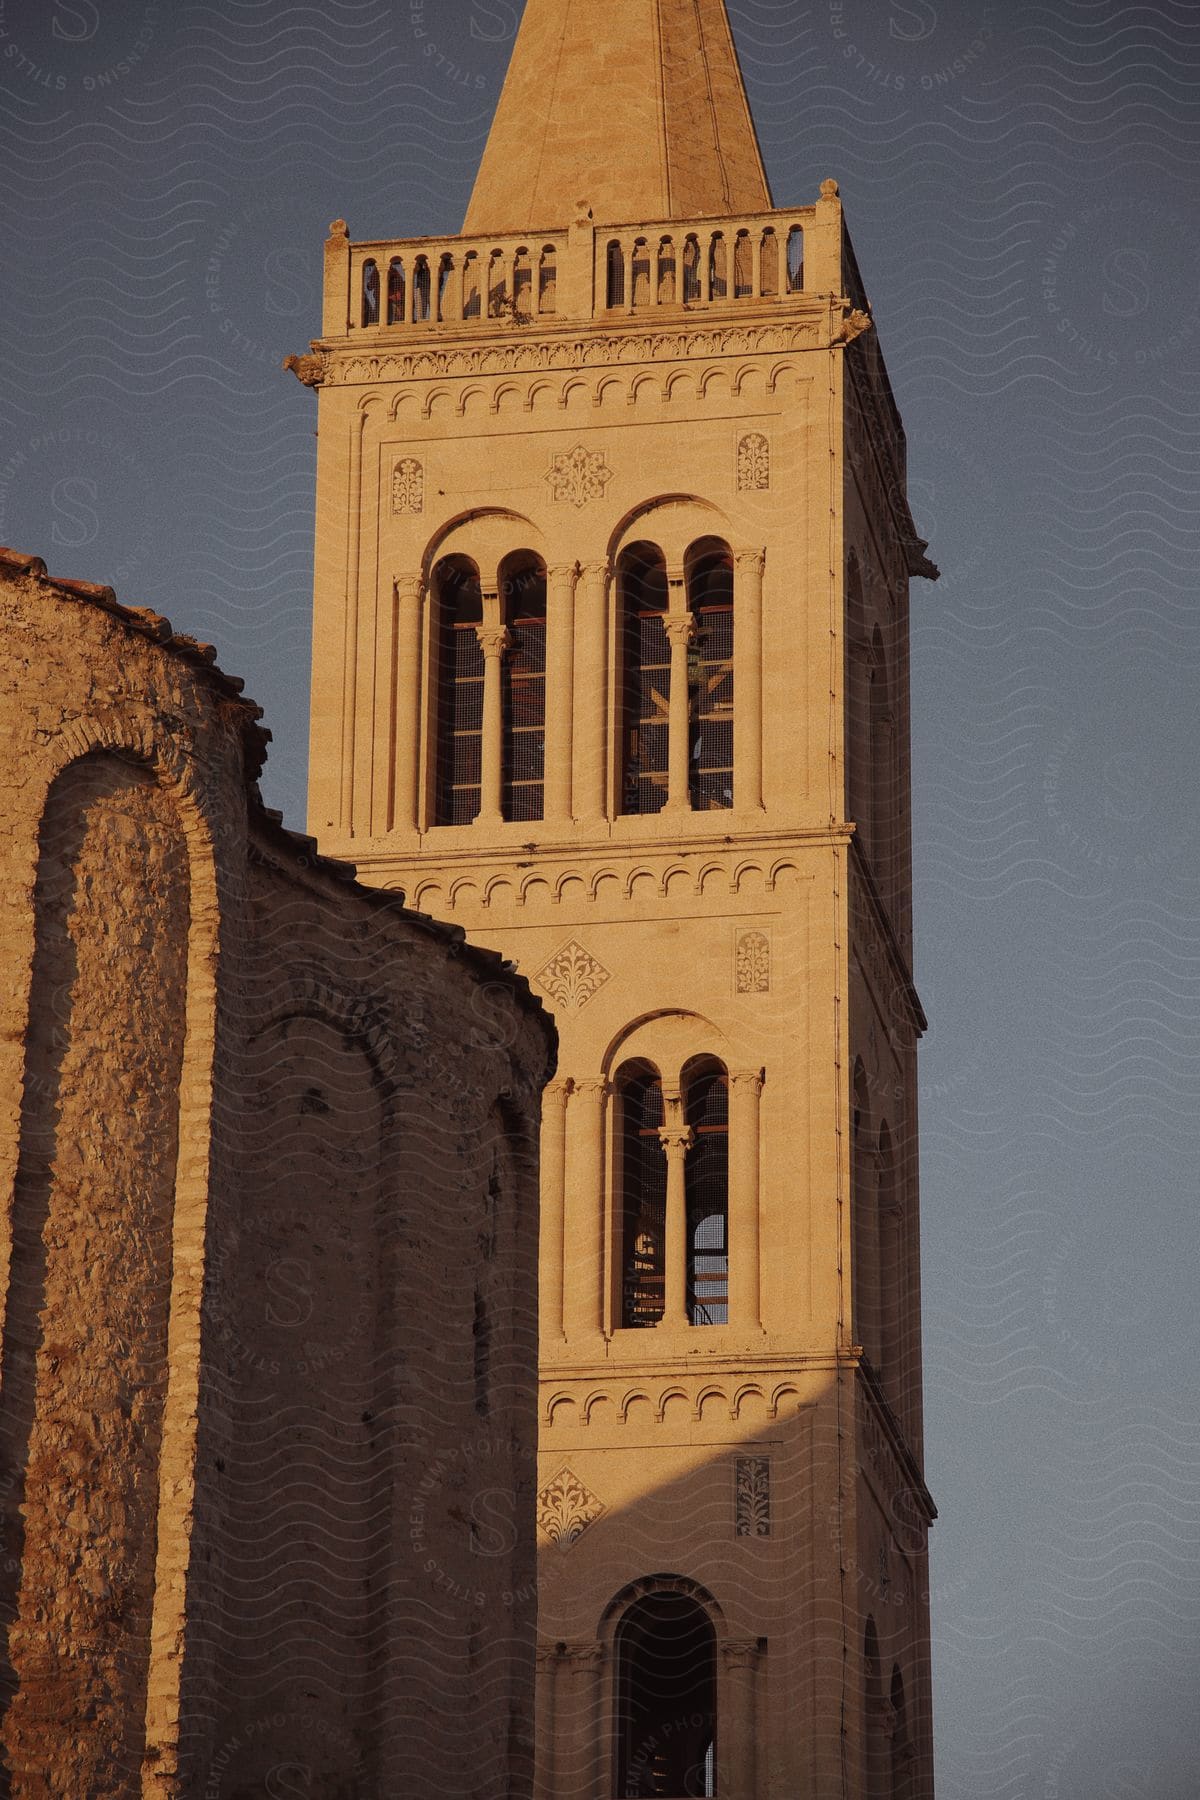 A view of a tower on an ancient building